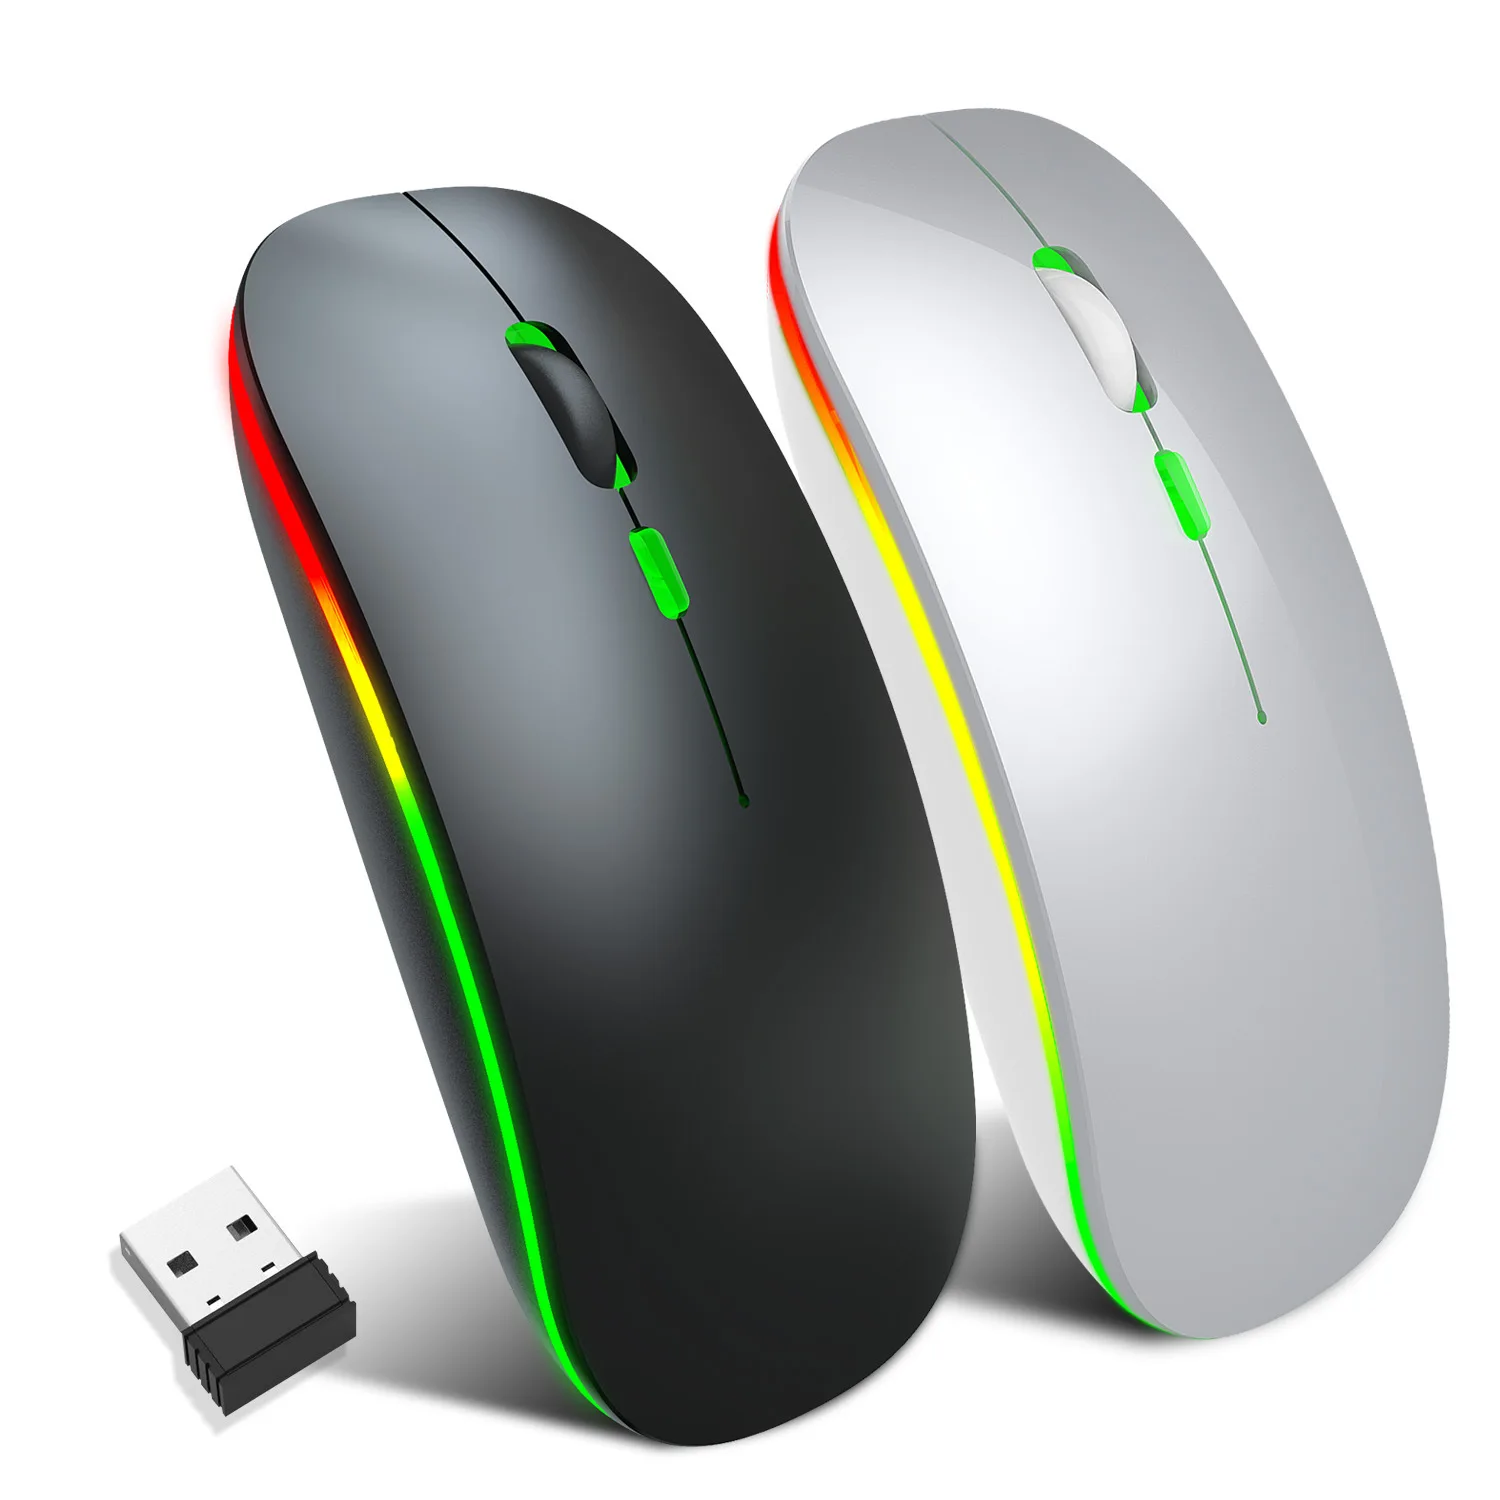 

Wireless Mouse Silent Mouse 1600 DPI Ergonomic Mause Noiseless PC Mouse Mute Colorful Glowing Office Chargeable Mouse